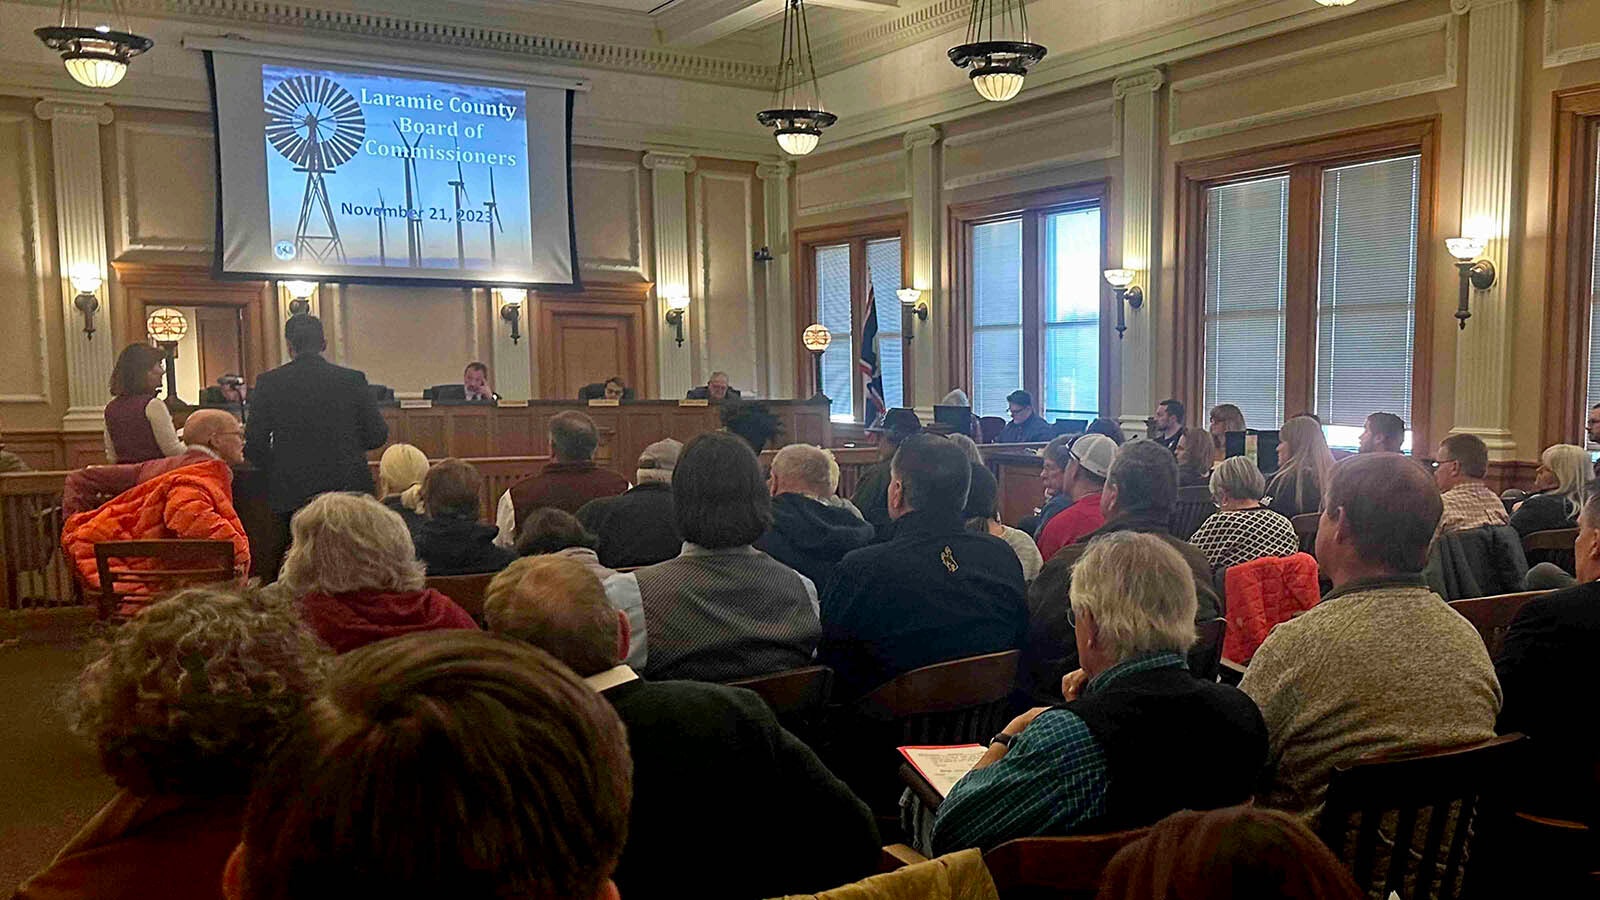 Laramie County commissioners meet Tuesday to hear a pair of proposals for live horse racing, including one that was tabled that would have had live racing at Cheyenne Frontier Days.